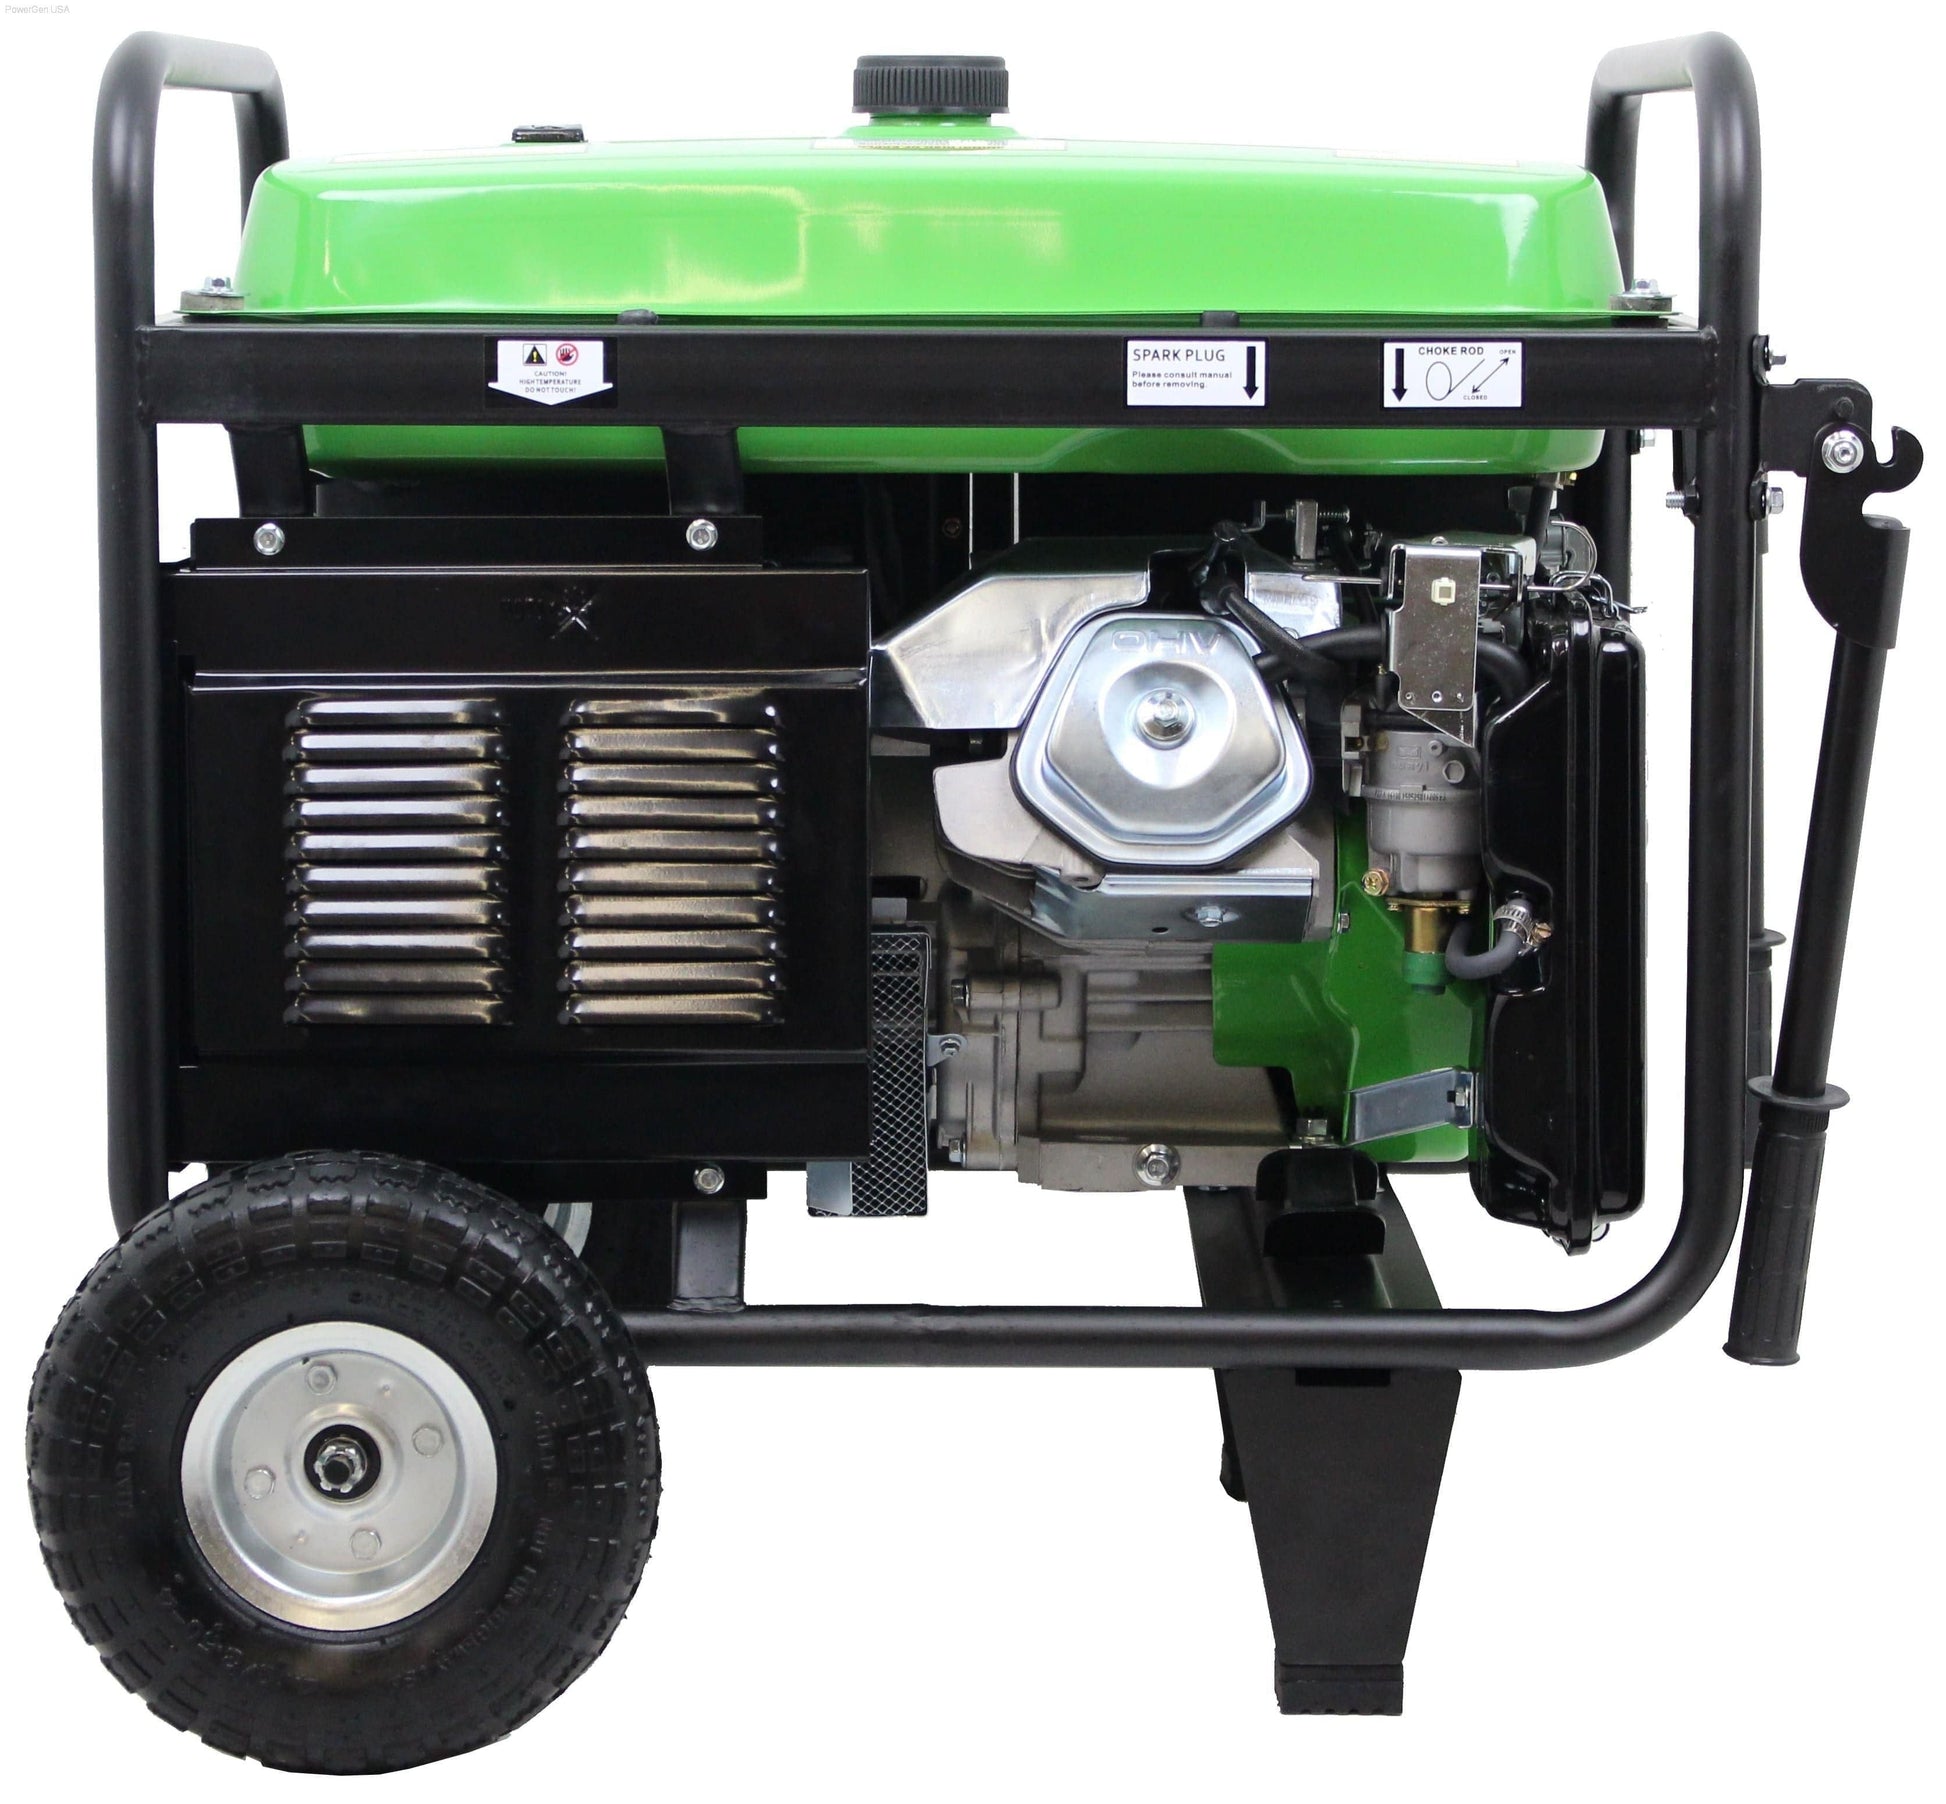 Gas Generators - LIFAN Power USA 6600-Watt 13hp Gas Powered Portable Generator With Electric And Recoil Start